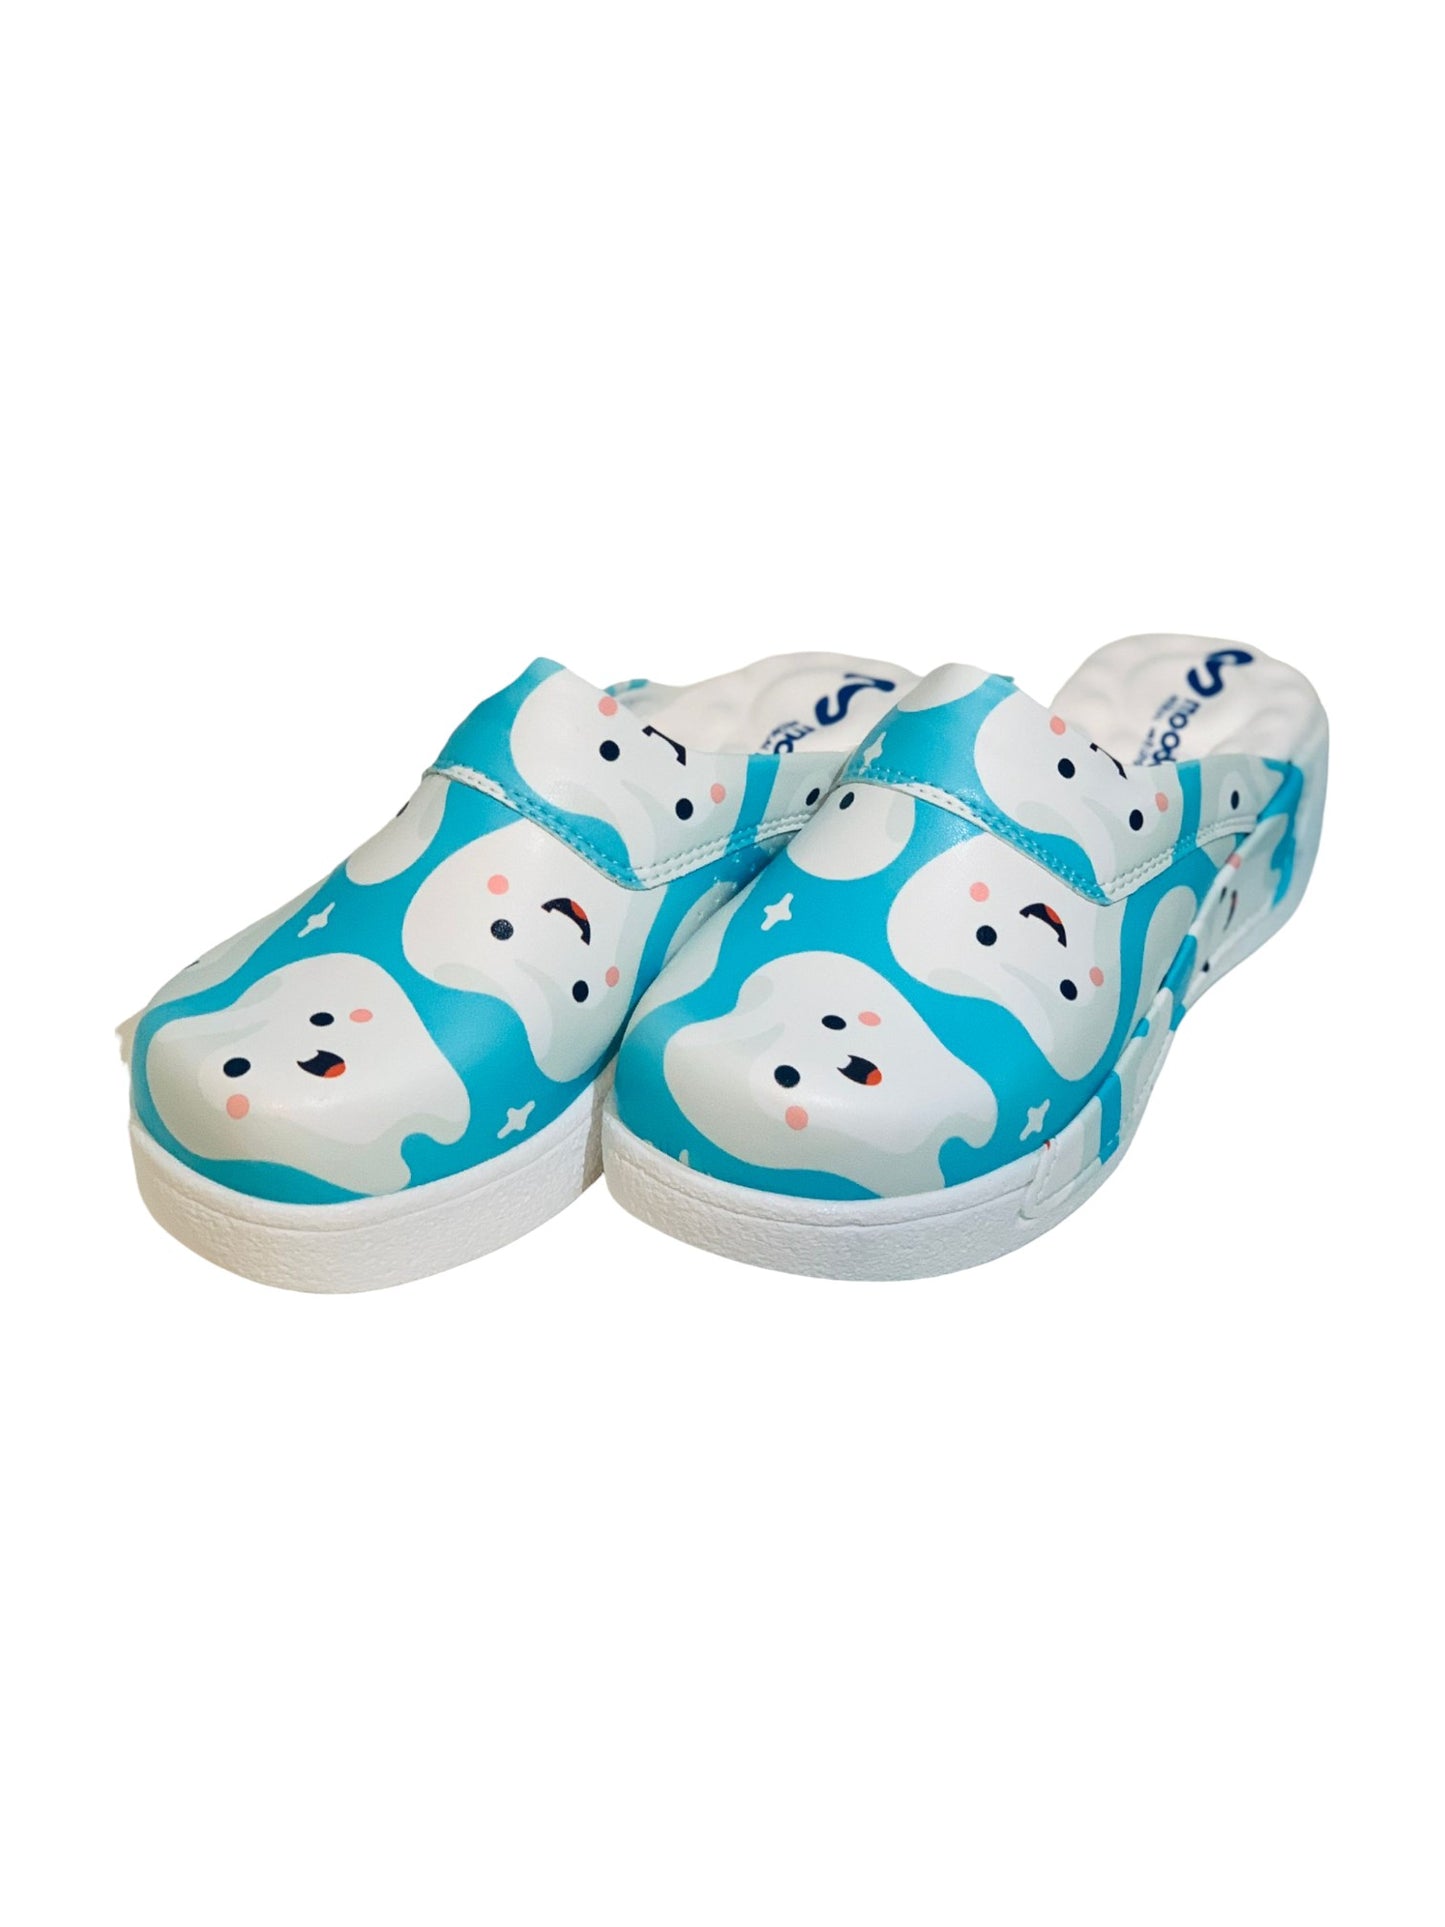 Orthopedic Medical Clogs, Turquoise with Print, Unisex - Dentist Comfort Model